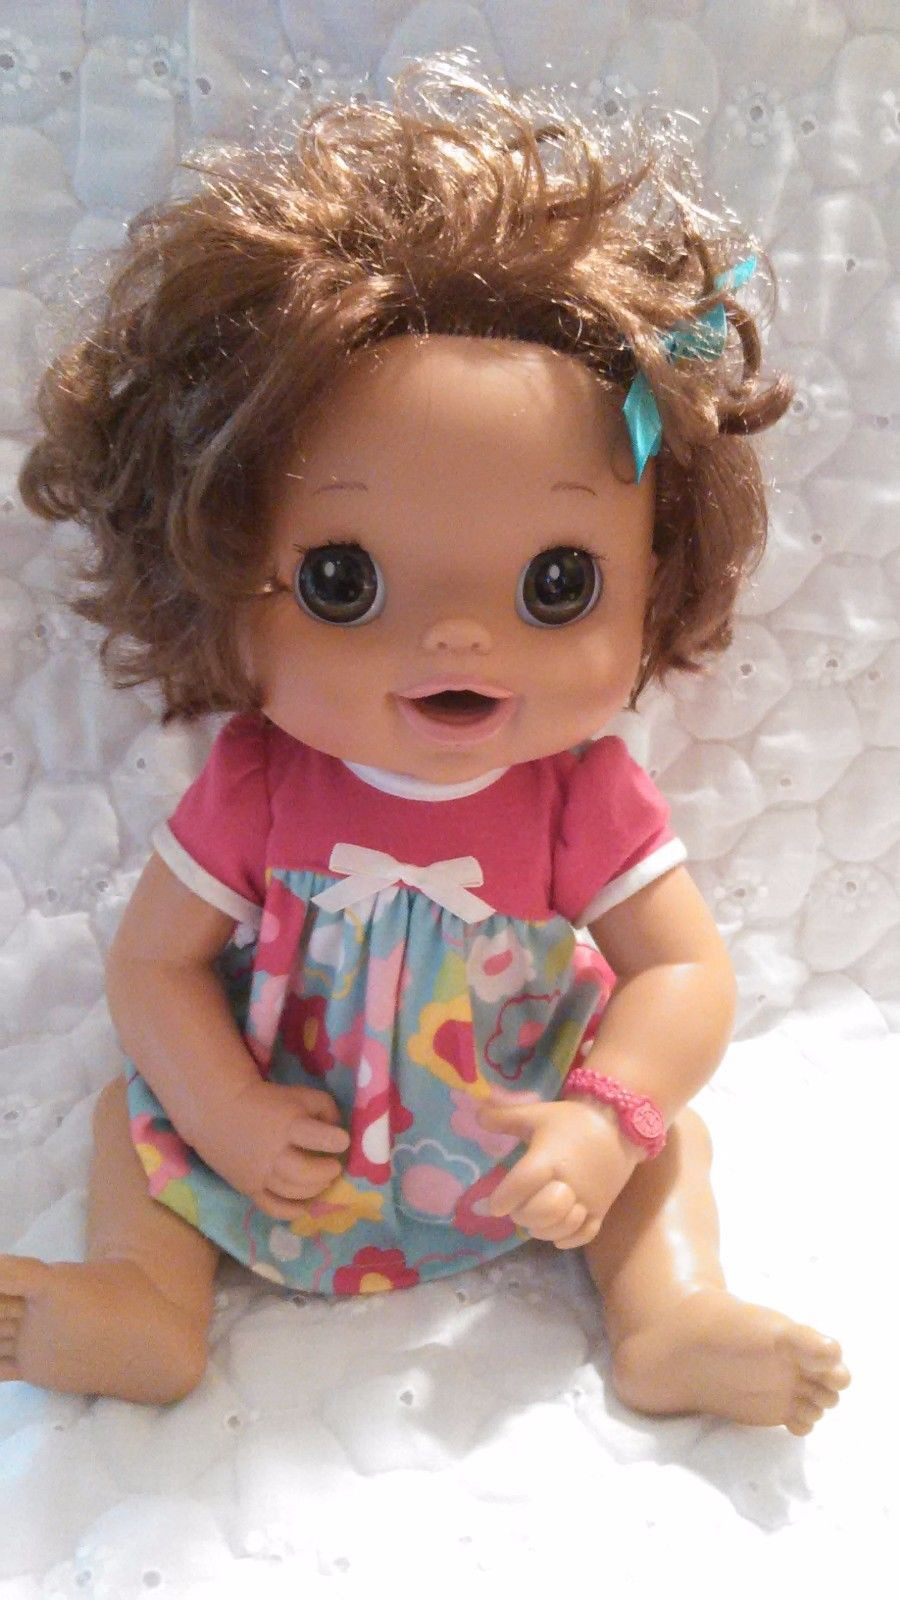 Baby Alive Doll Brown Hair
 My Baby Alive Blonde Interactive Doll Talks Eats Poops